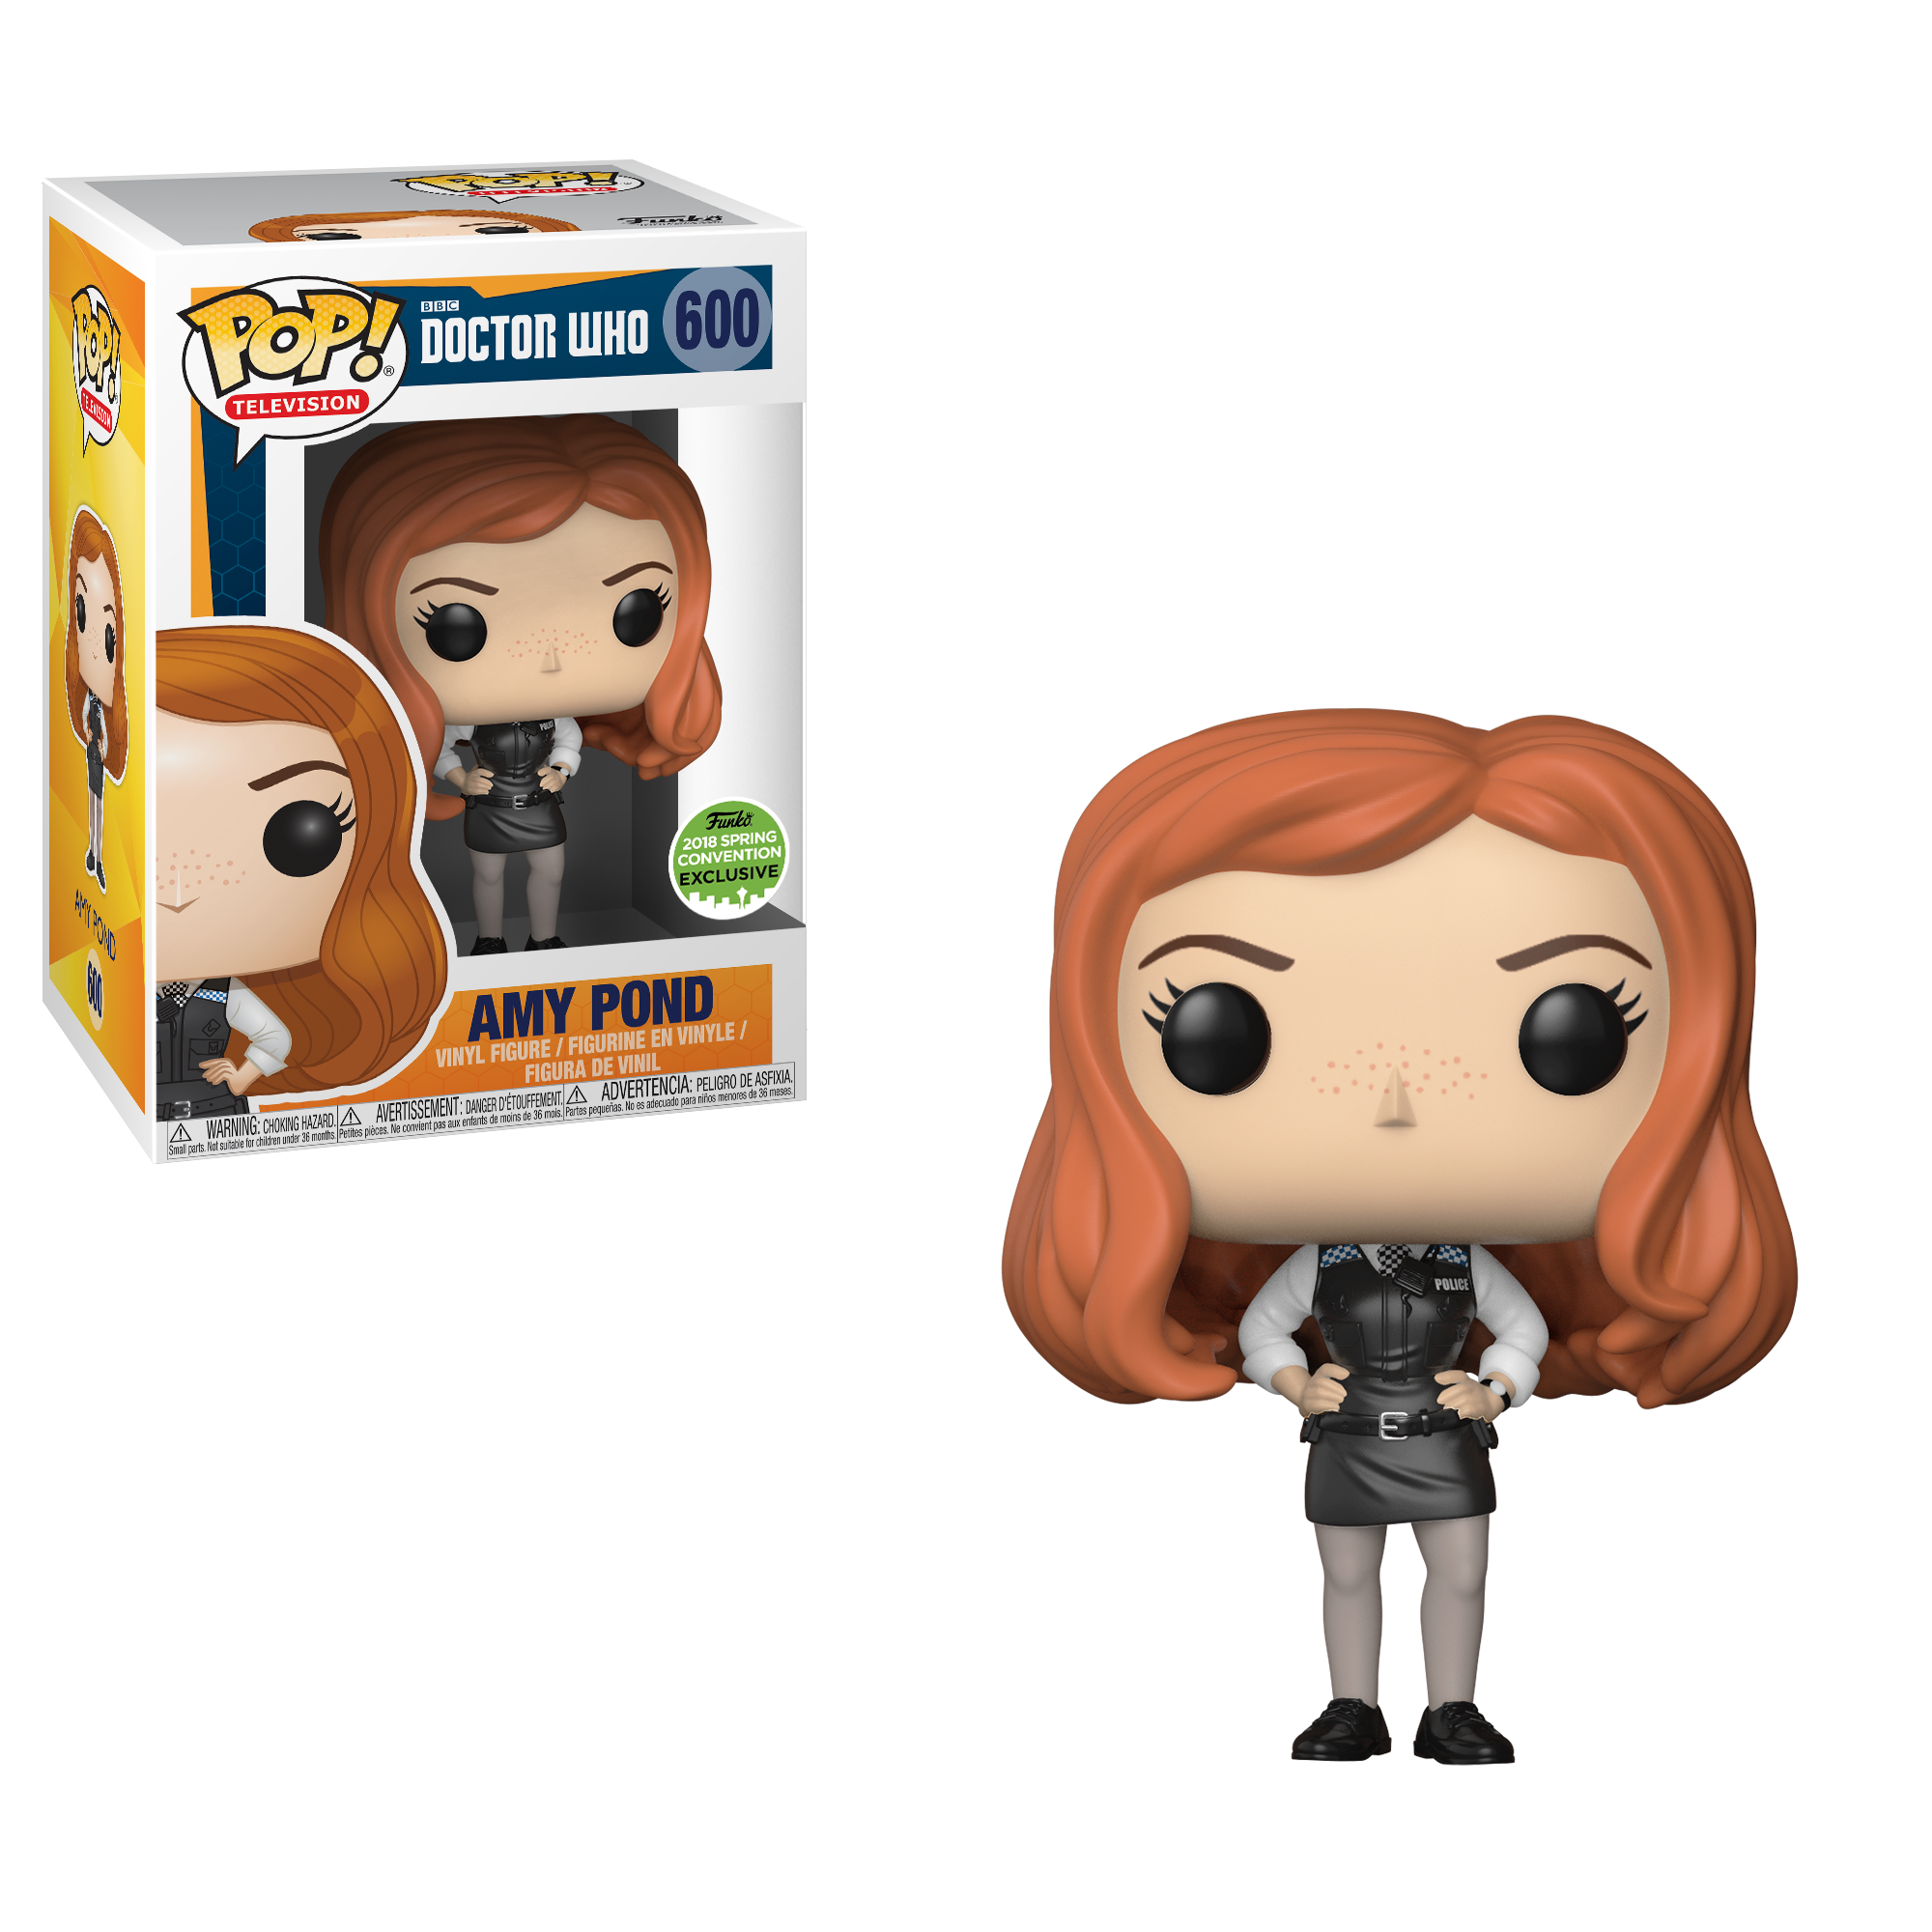 Pop! Amy Pond vinyl collectible figure from Doctor Who